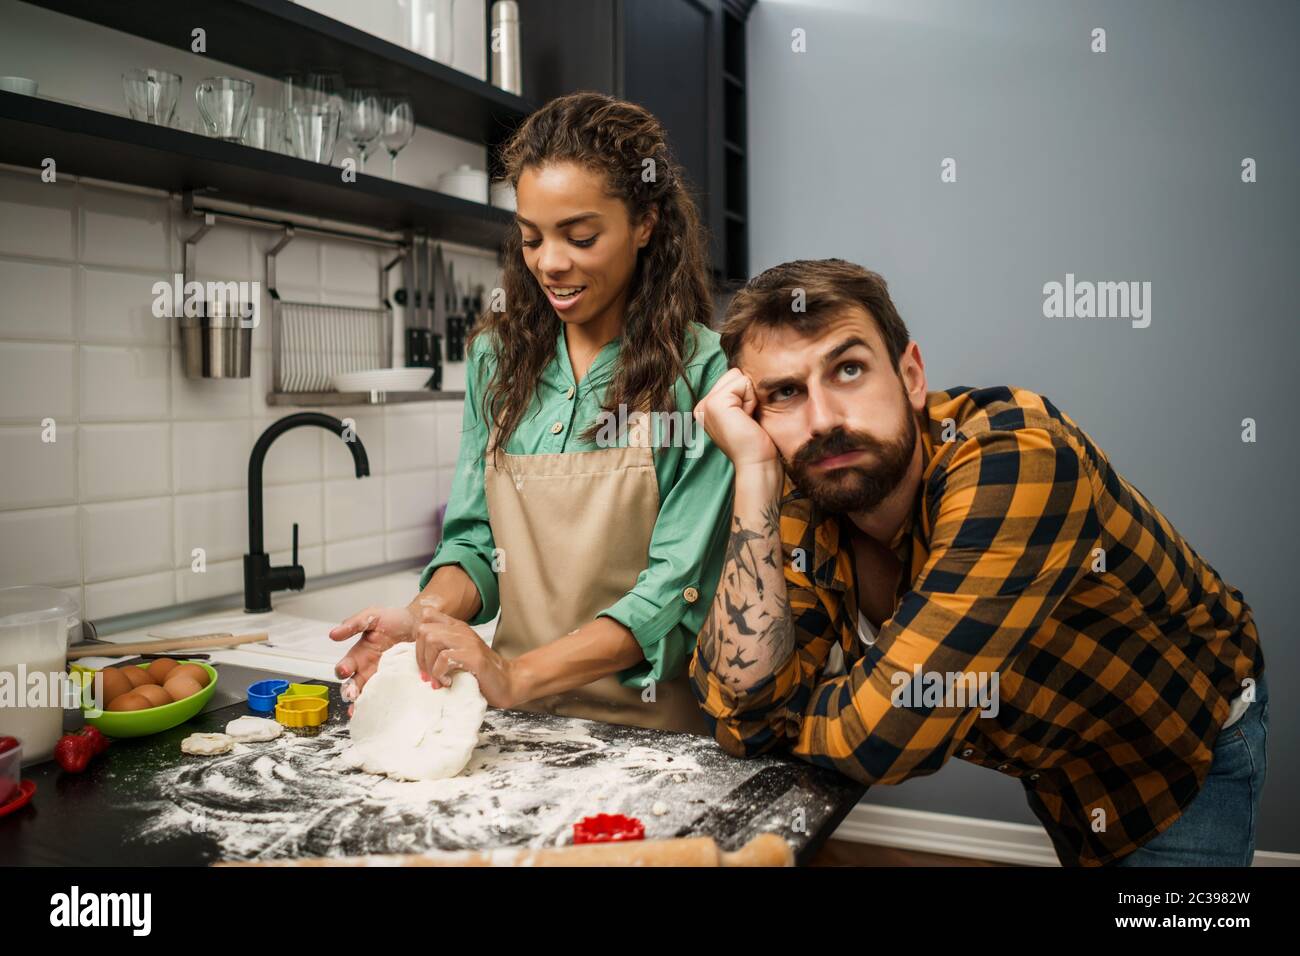 Young multiethnic couple cooking in their kitchen. They are making cookies. Stock Photo